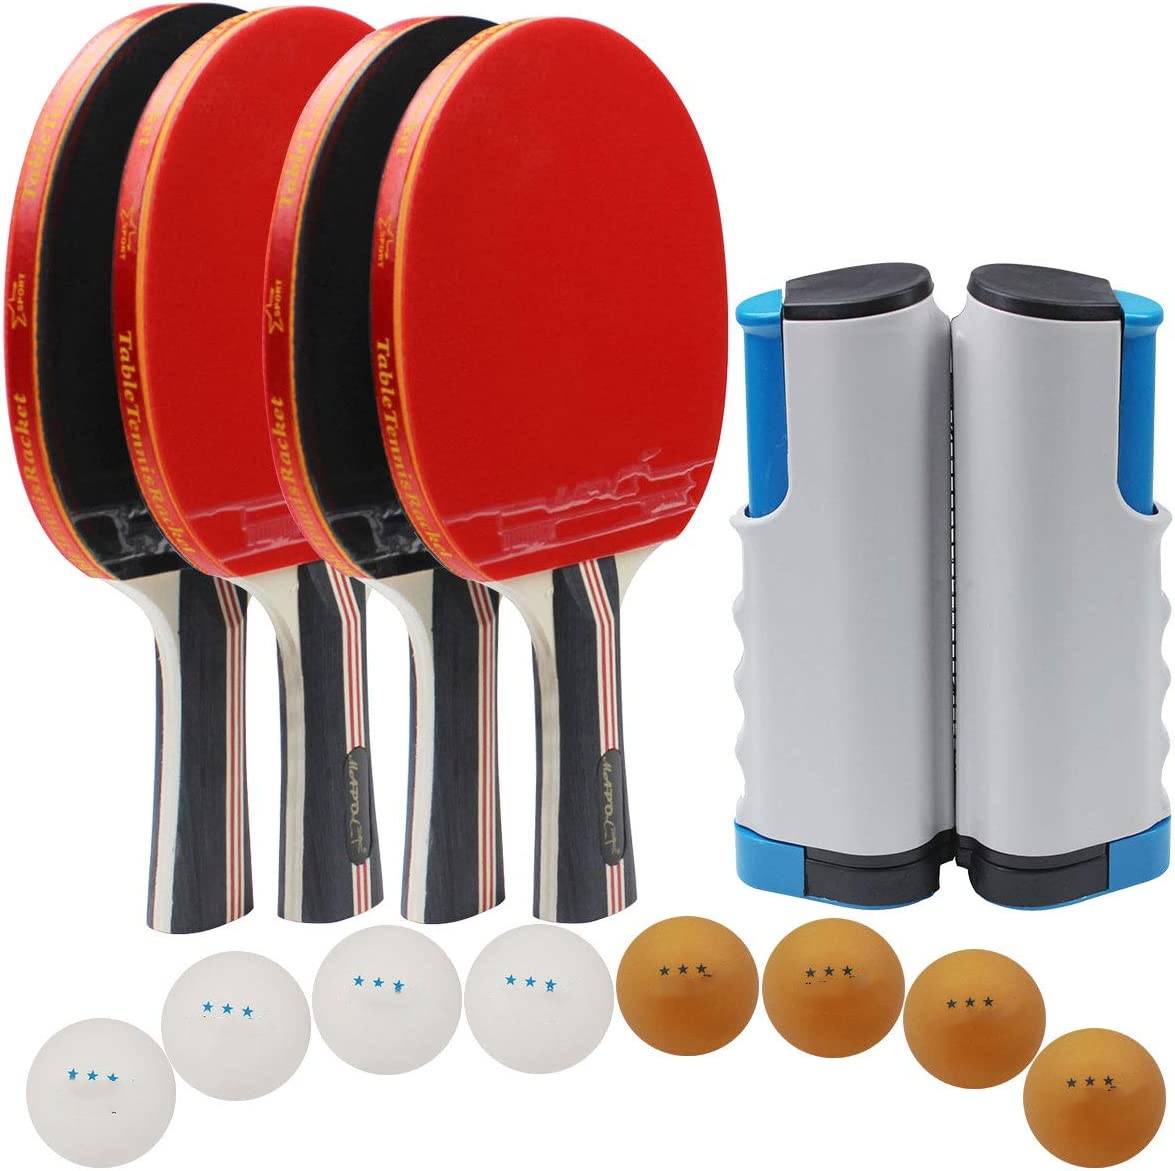 Factory OEM best ping pong paddle set, Portable Table Tennis Set with Retractable Net, Perfect for Professional Play and Amateurs